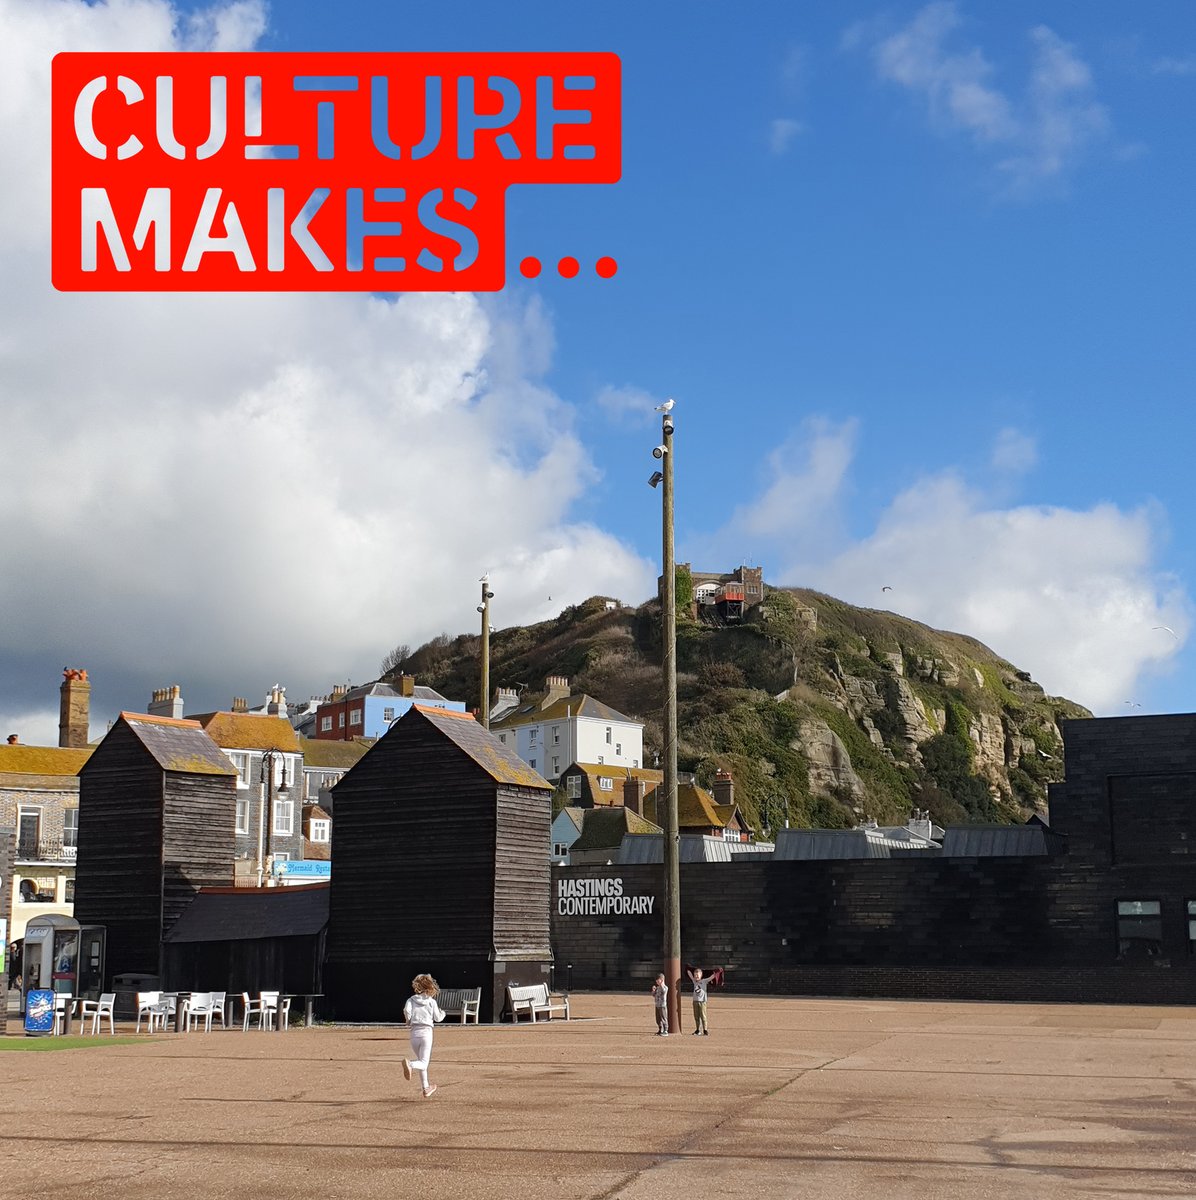 CULTURE MAKES... launches today! A bold and joyful celebration of the ways in which culture has an impact on our lives. Organised by @CulturalPhilFdn, and backed by 100s of cultural organisations across the UK. Join us: tinyurl.com/culturemakes #CultureMakes @weareAchates